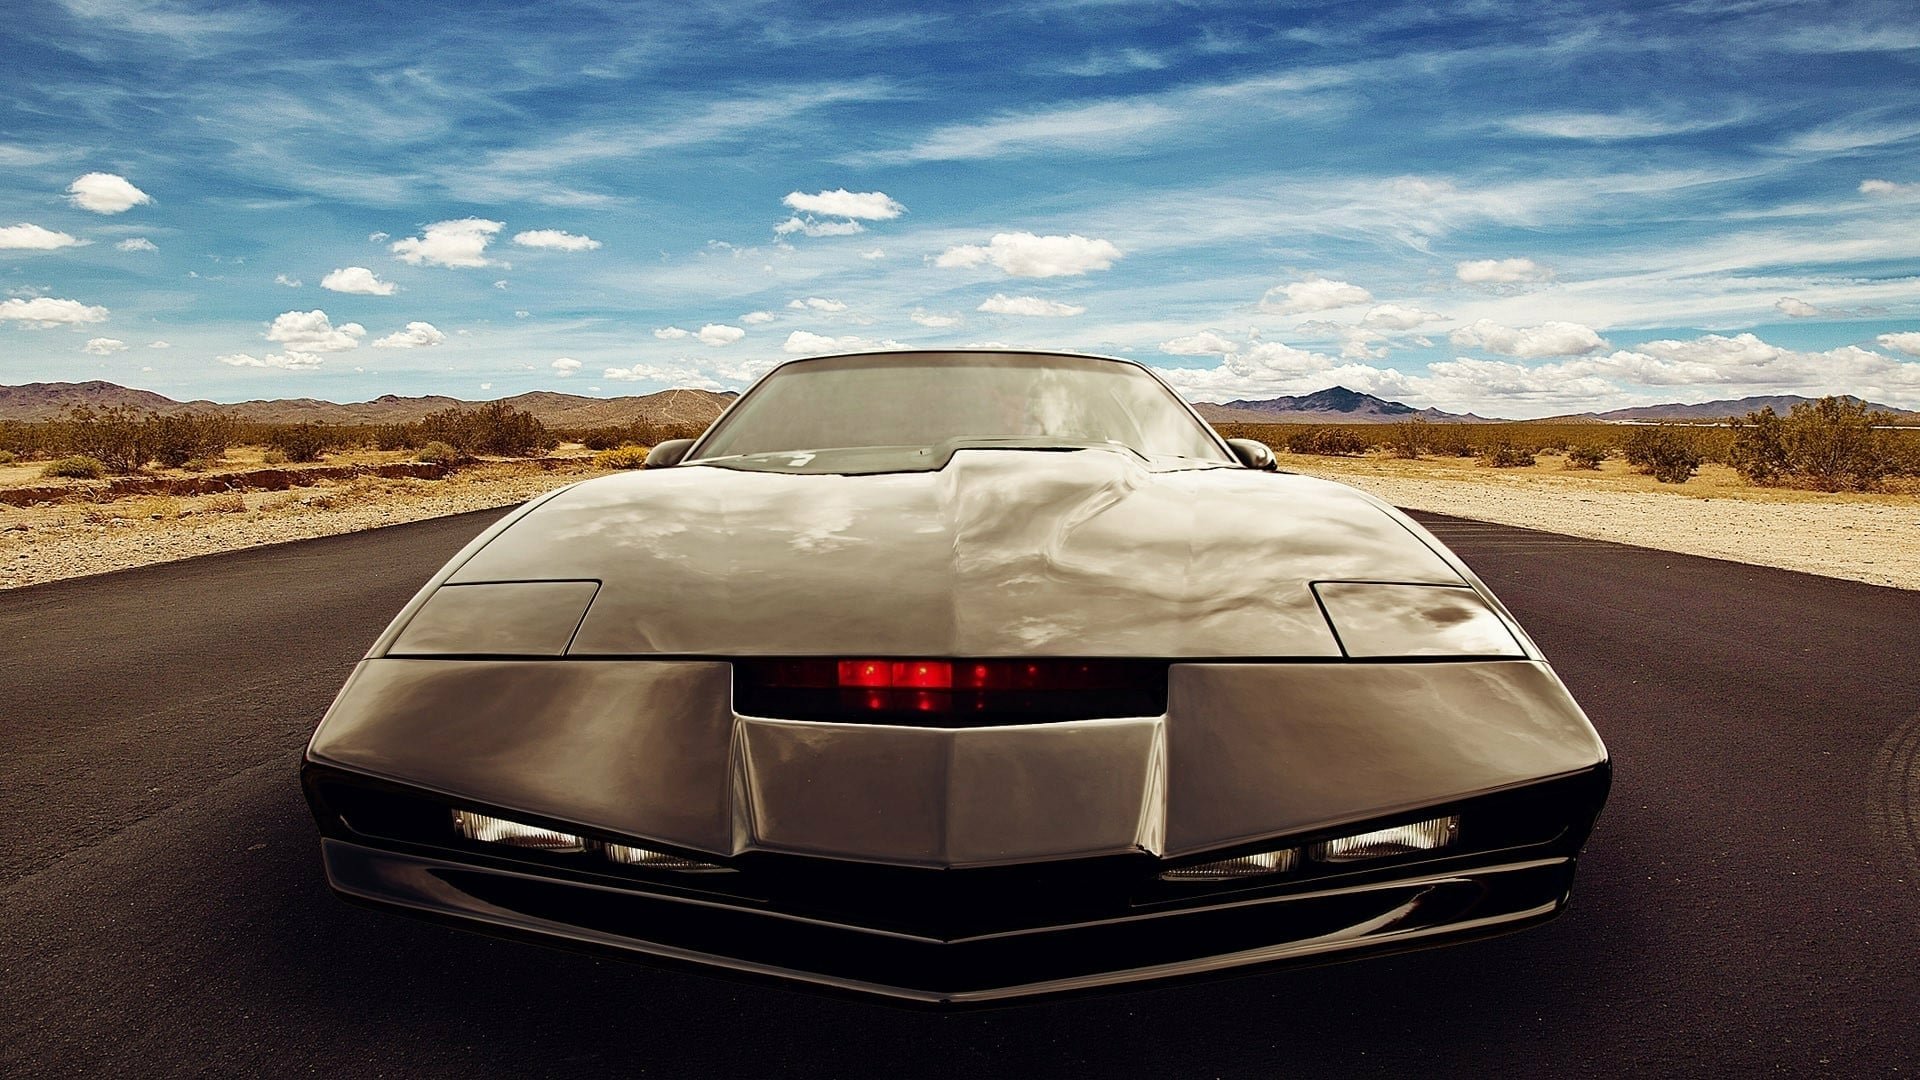 Knight Rider wallpaper by m01neo  Download on ZEDGE  1fee